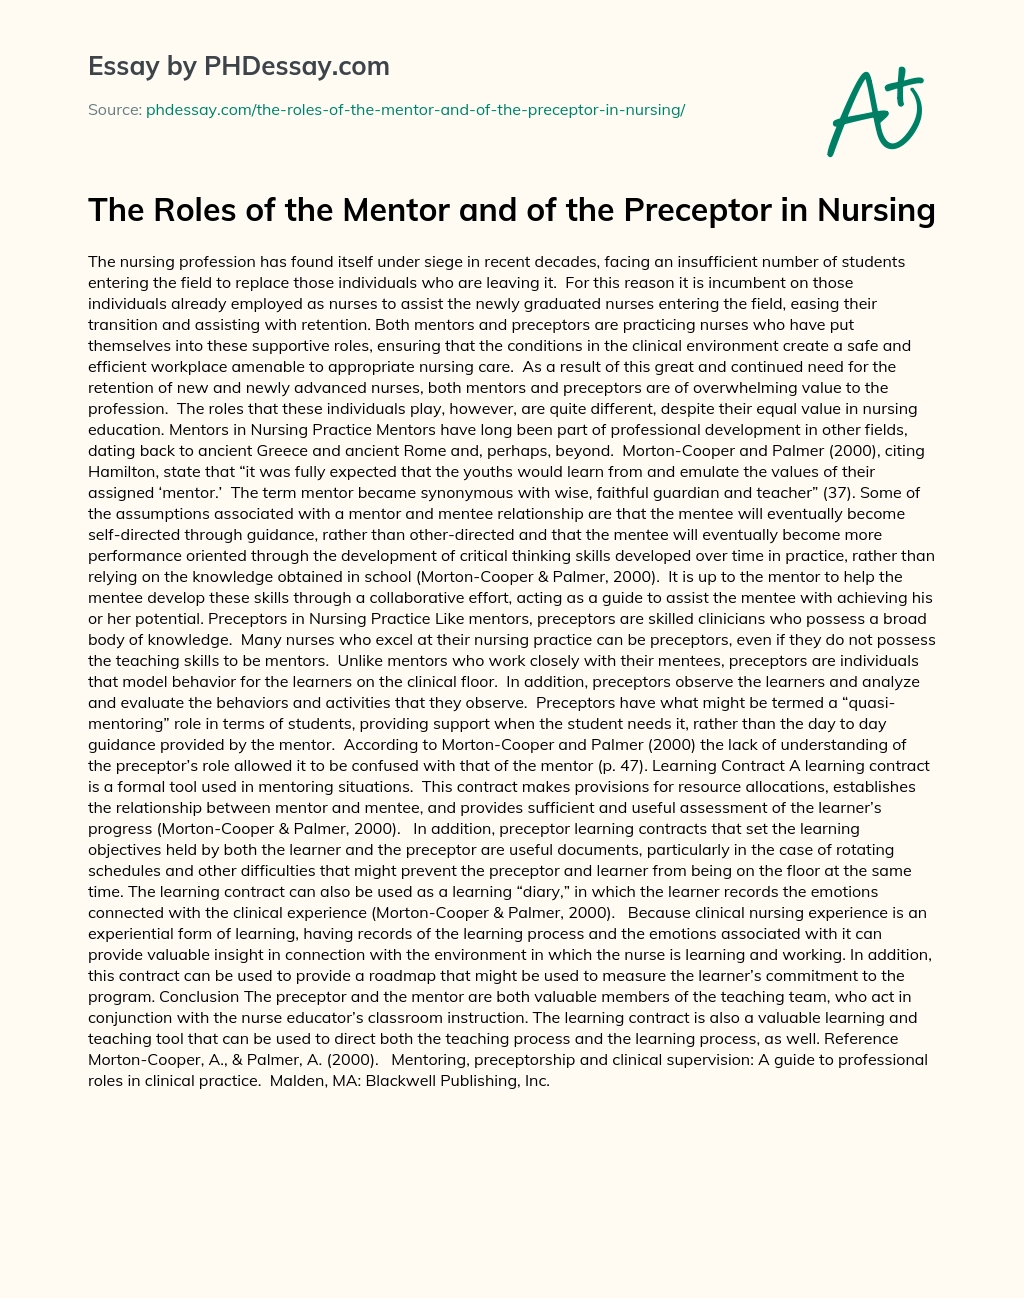 The Roles of the Mentor and of the Preceptor in Nursing - PHDessay.com